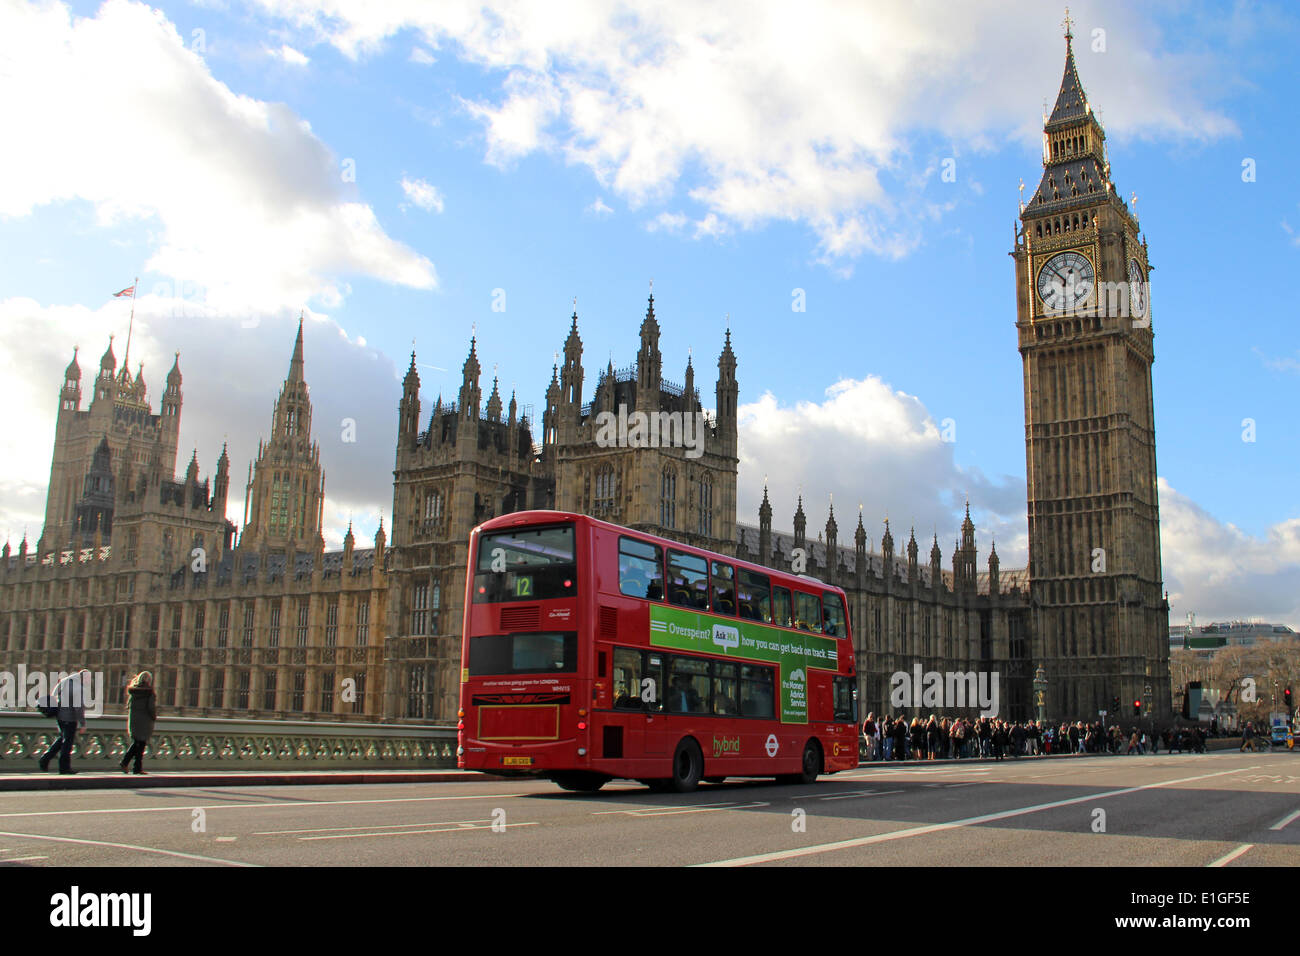 London: Palace of Westminster with Big Ben (Elizabeth Tower), 2014/01/11 Stock Photo